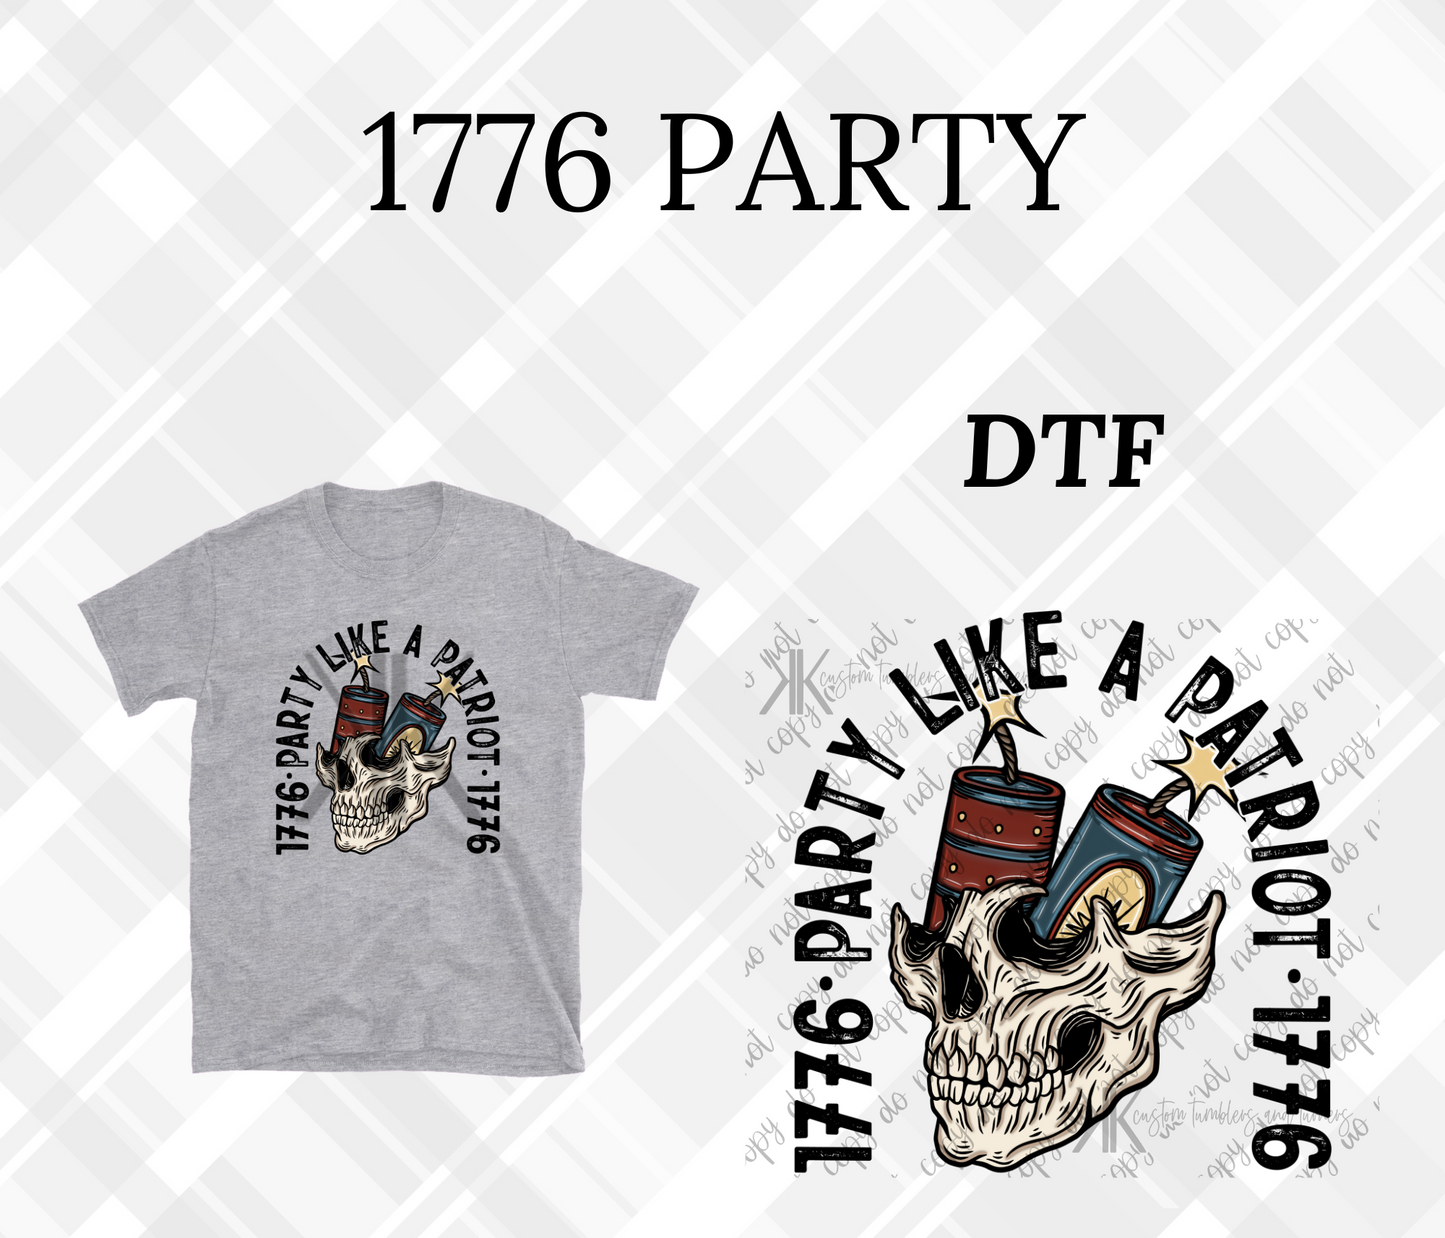 1776 PARTY